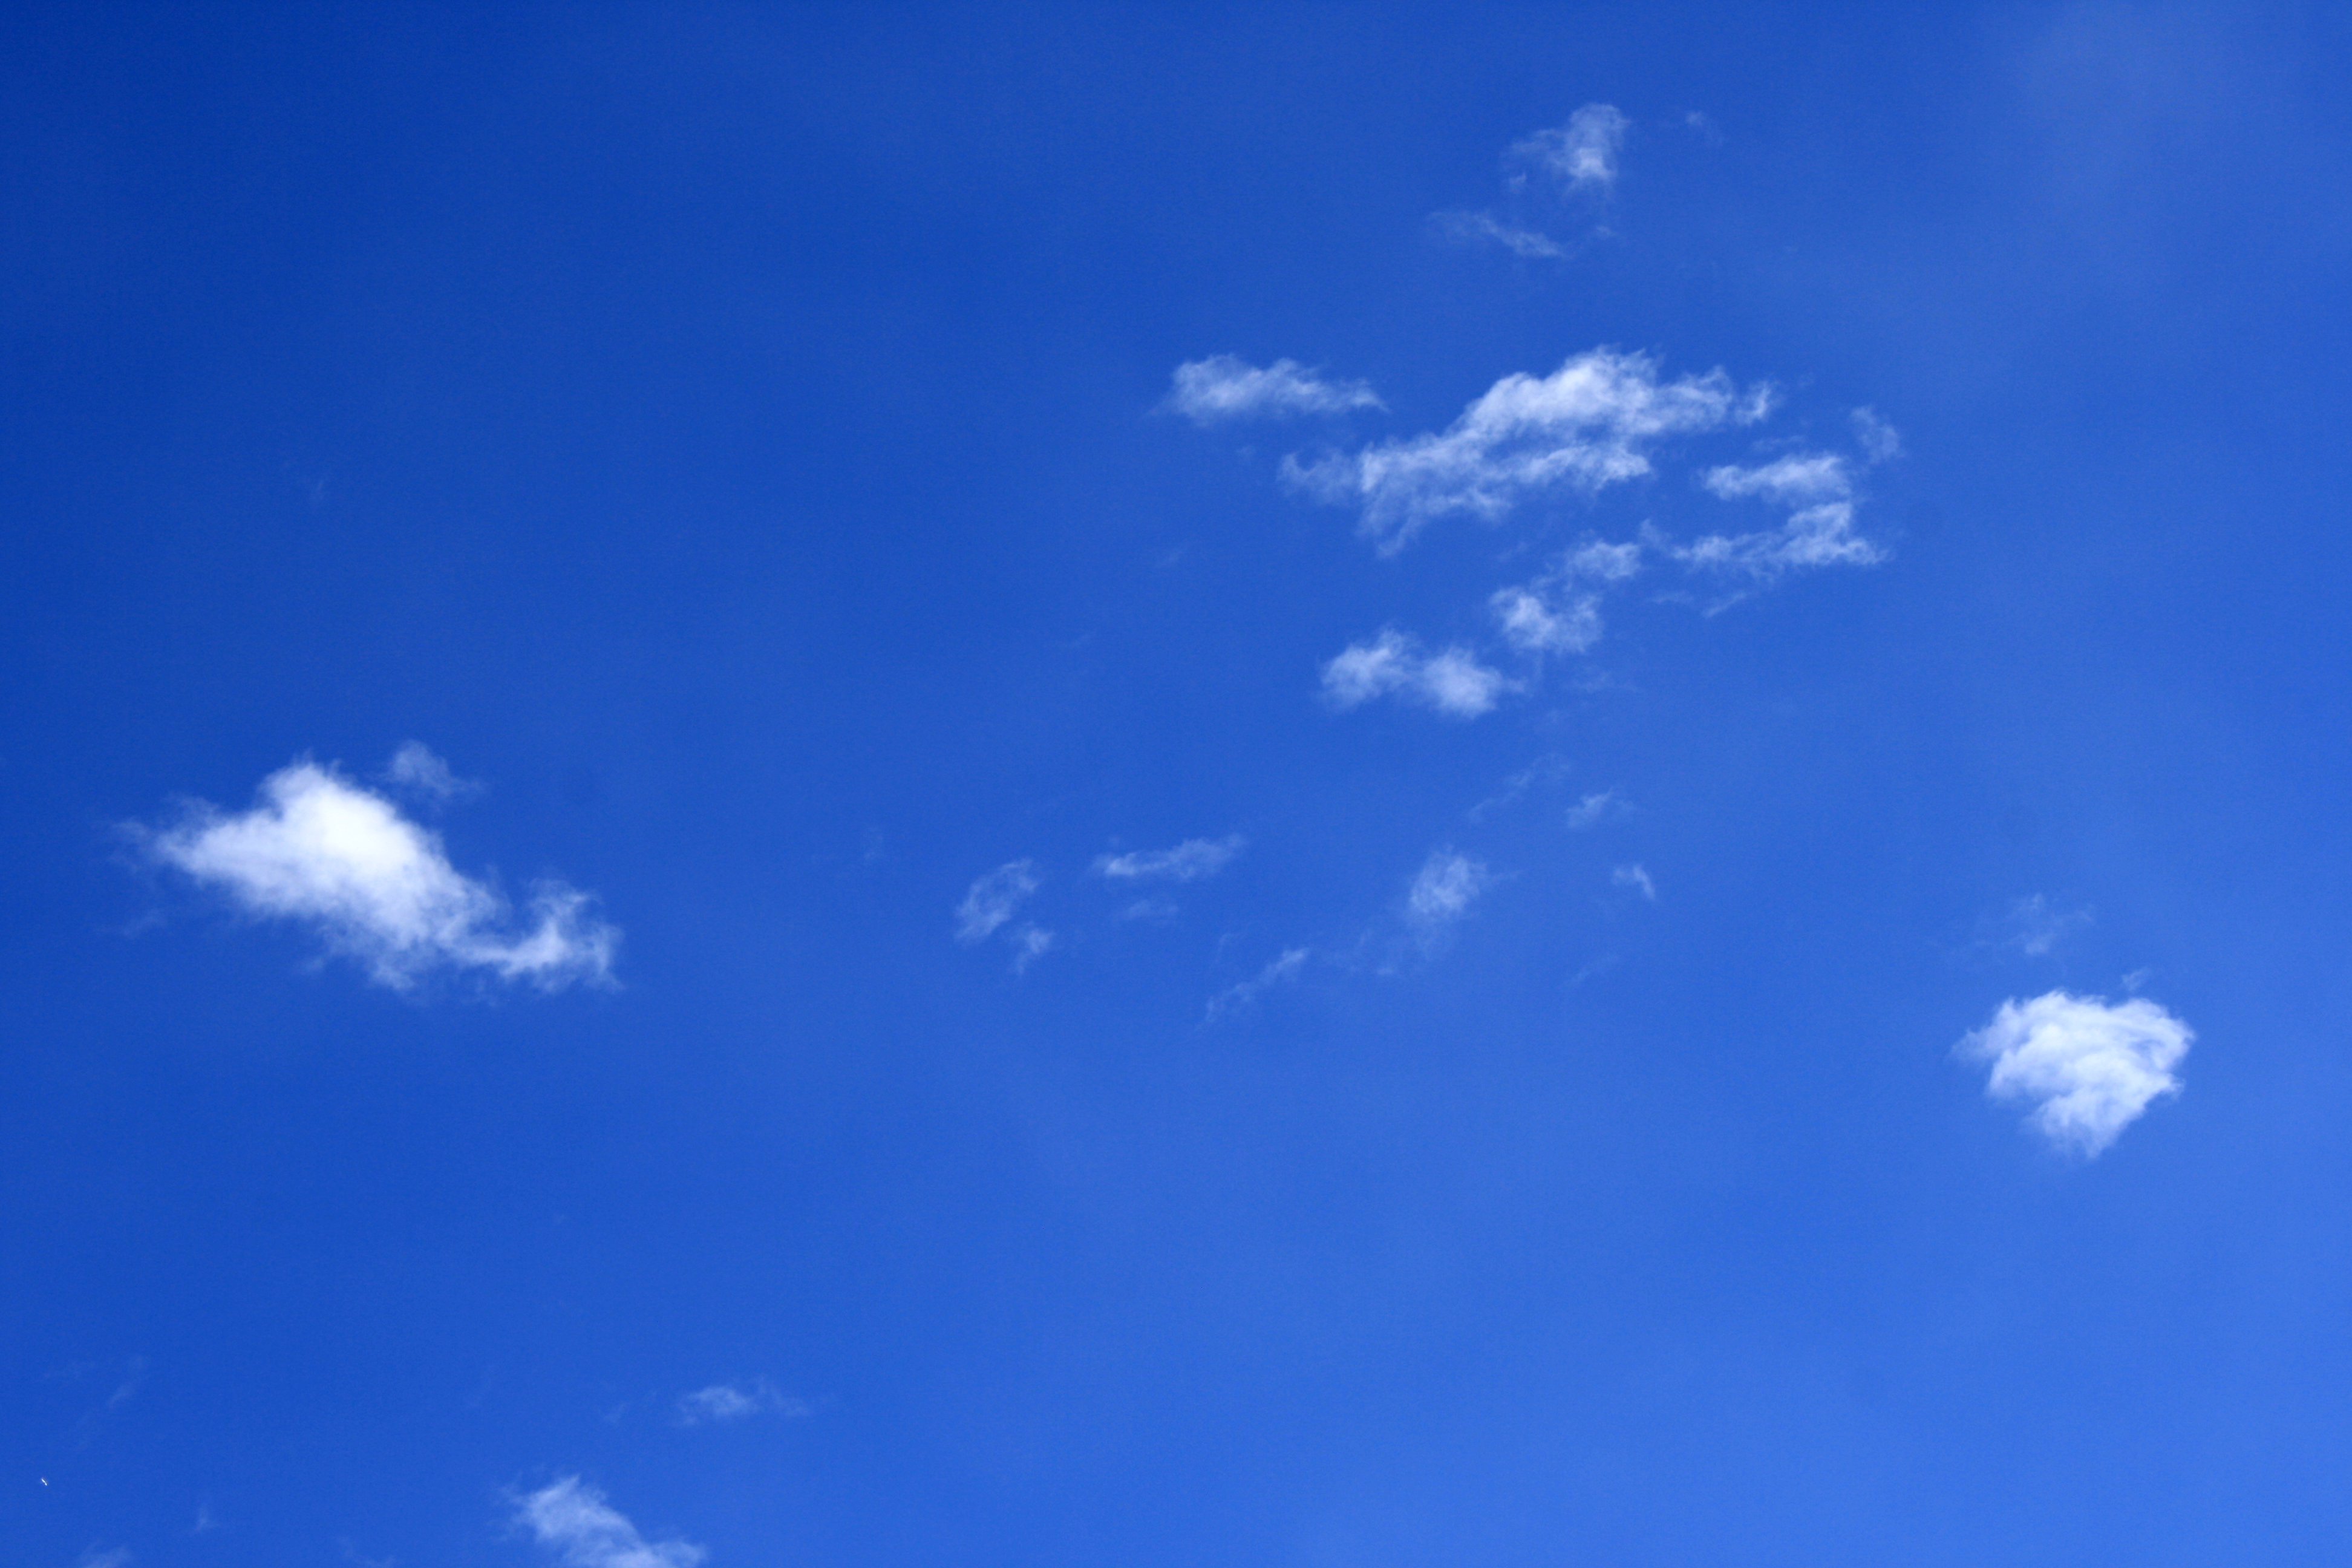 Bright Blue Sky With A Few Tiny White Clouds Picture   Free Photograph